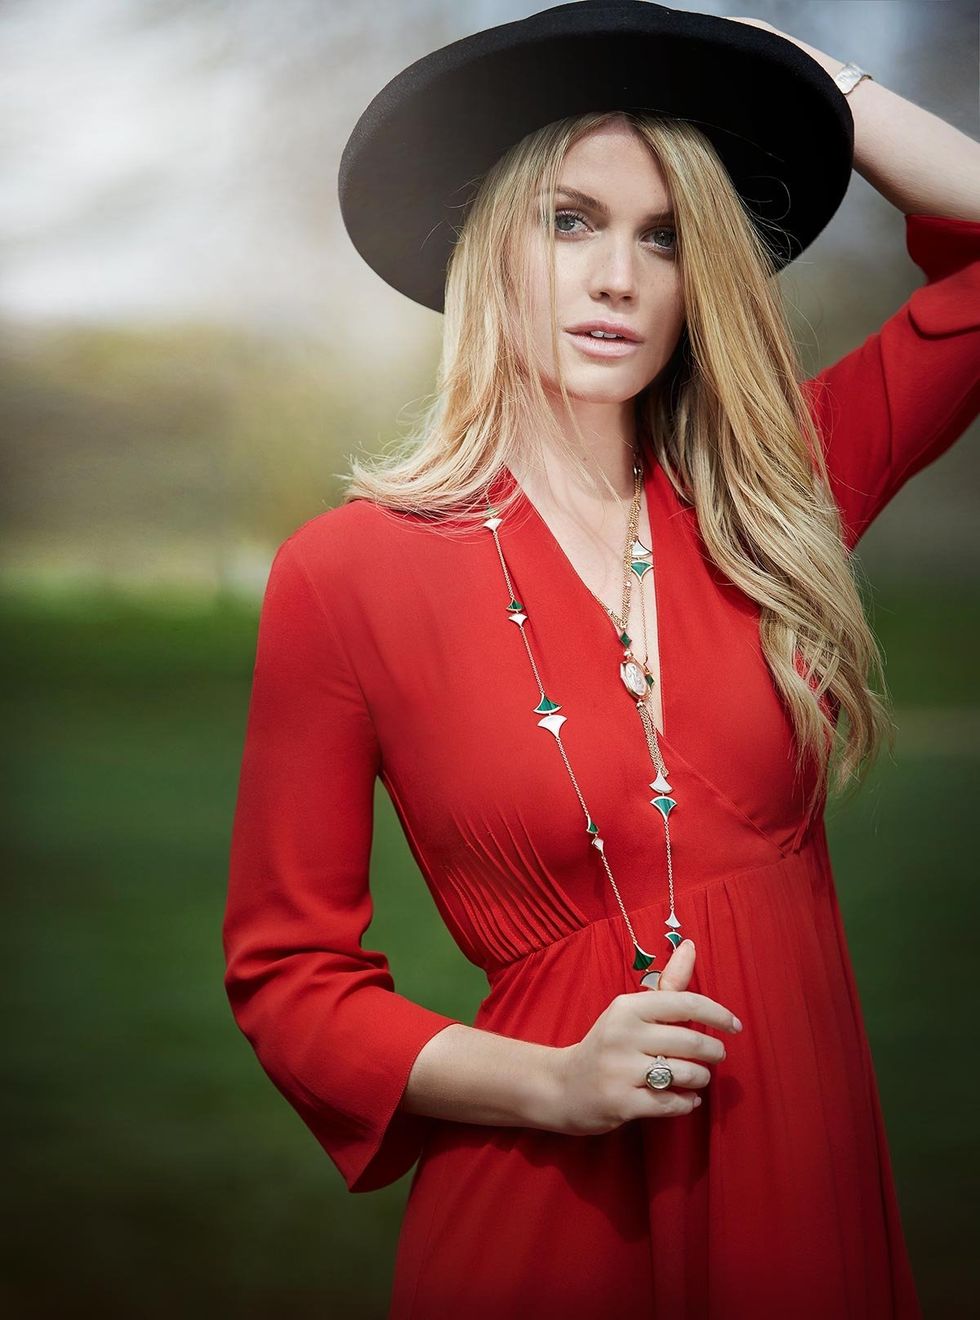 Red, Clothing, Blond, Beauty, Fashion, Hat, Model, Lip, Photo shoot, Outerwear, 